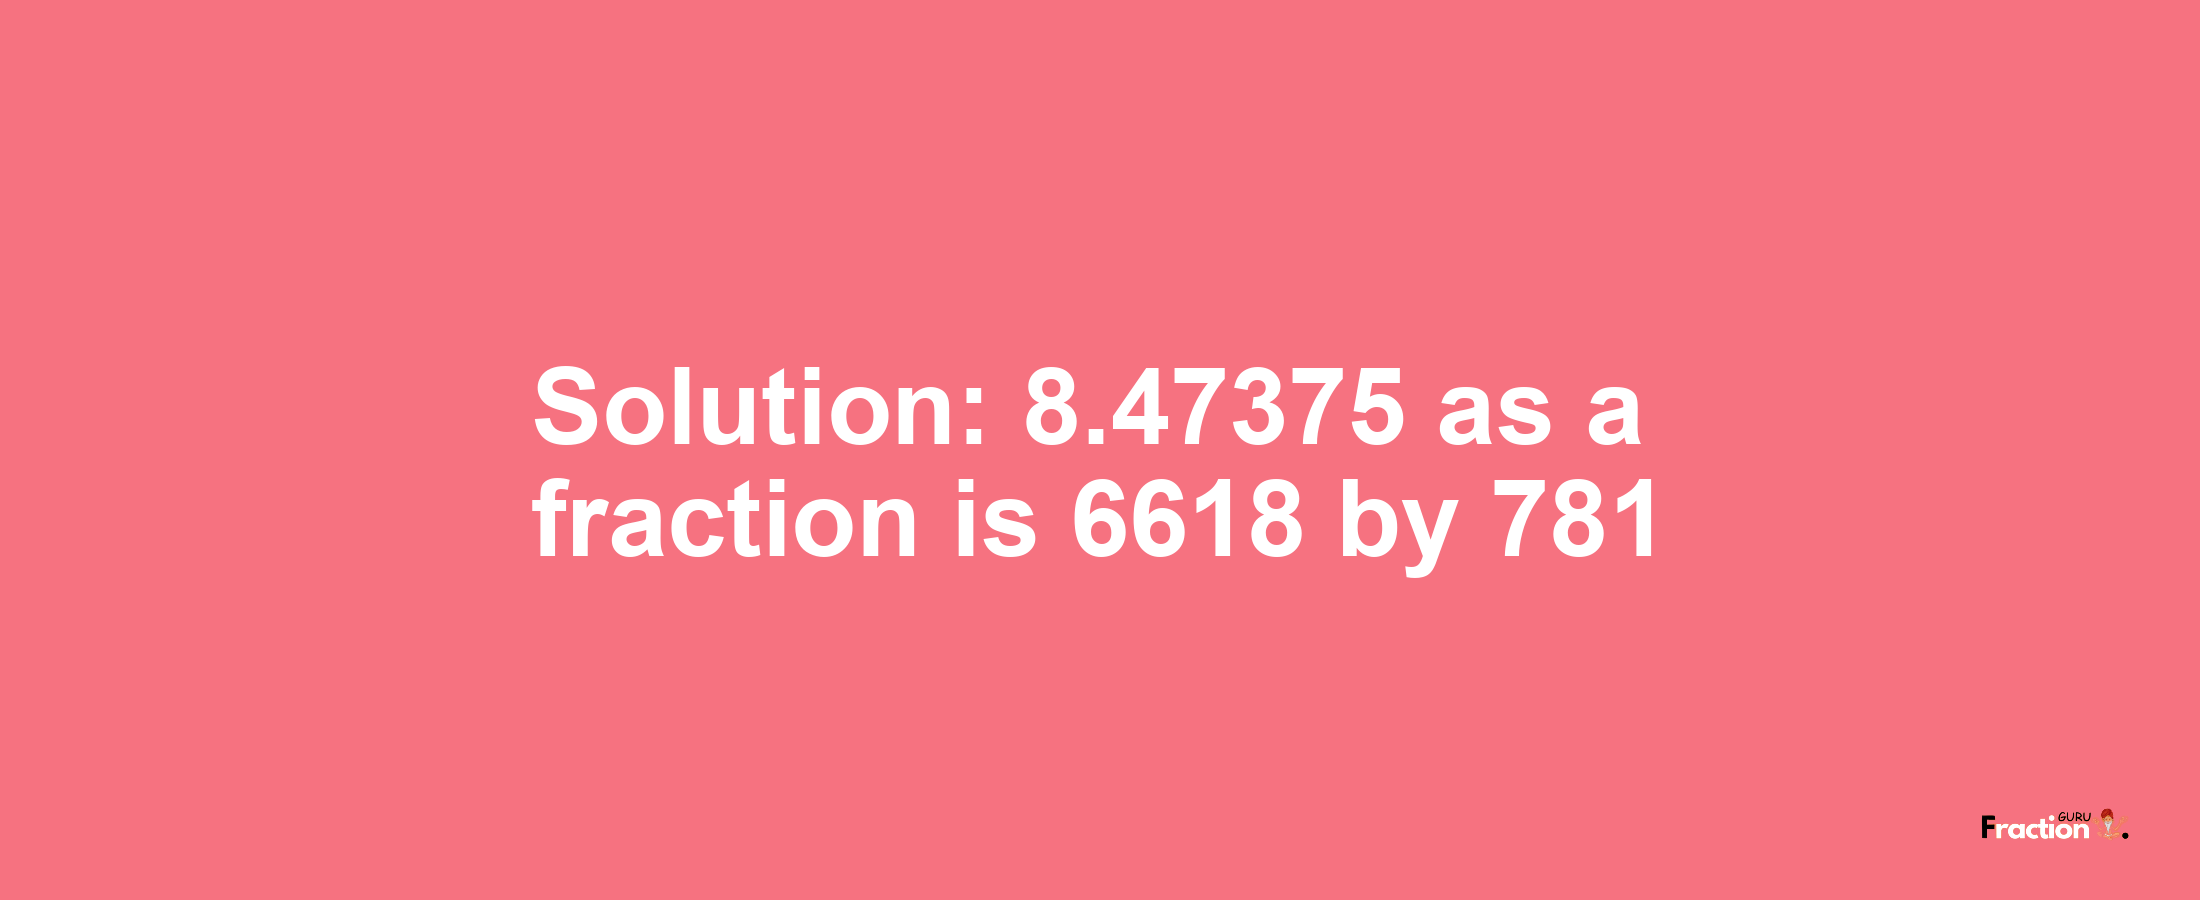 Solution:8.47375 as a fraction is 6618/781